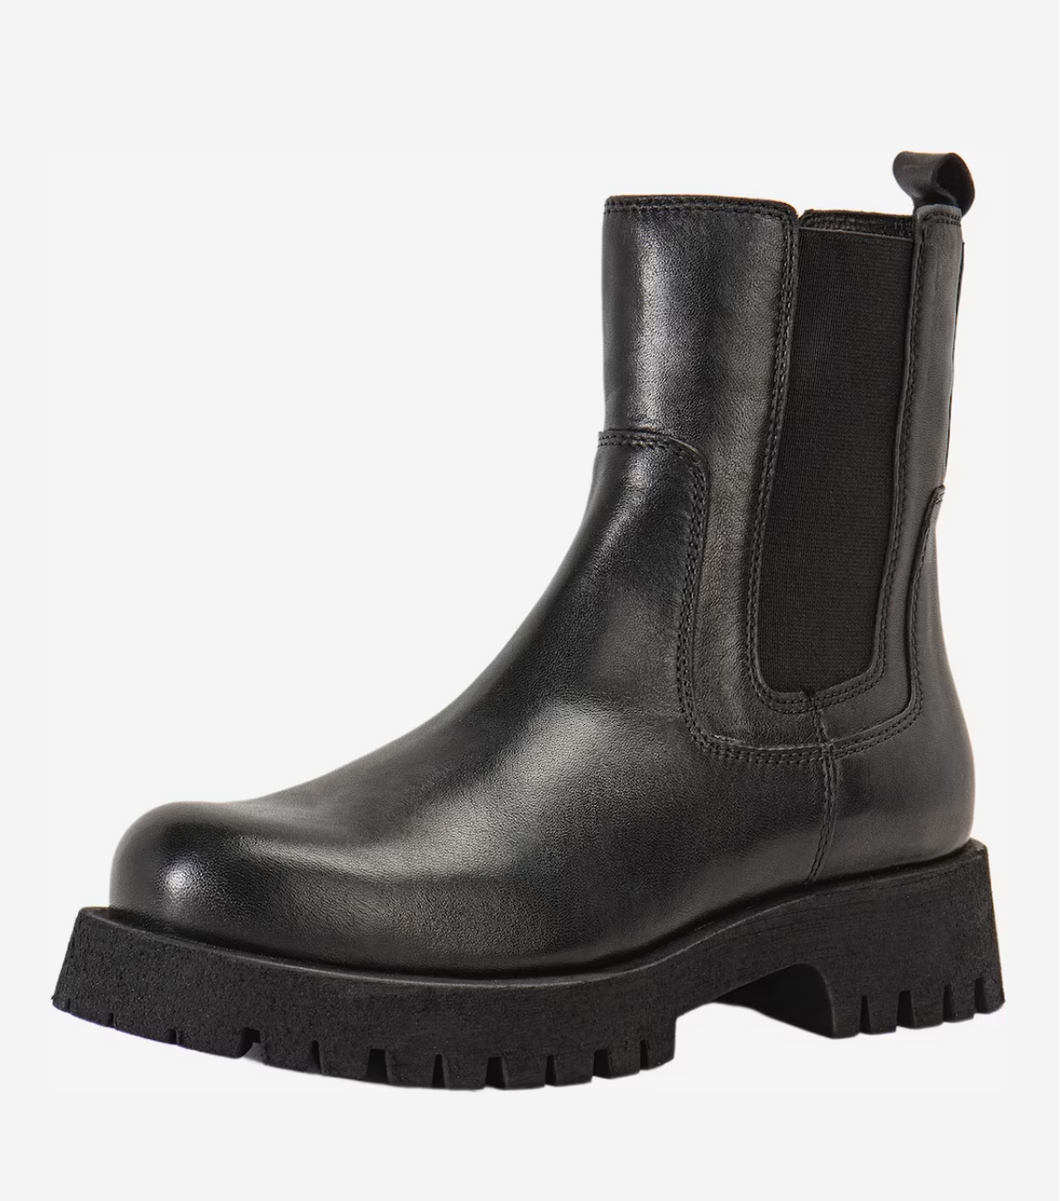 INUOVO Boots-753177 Black